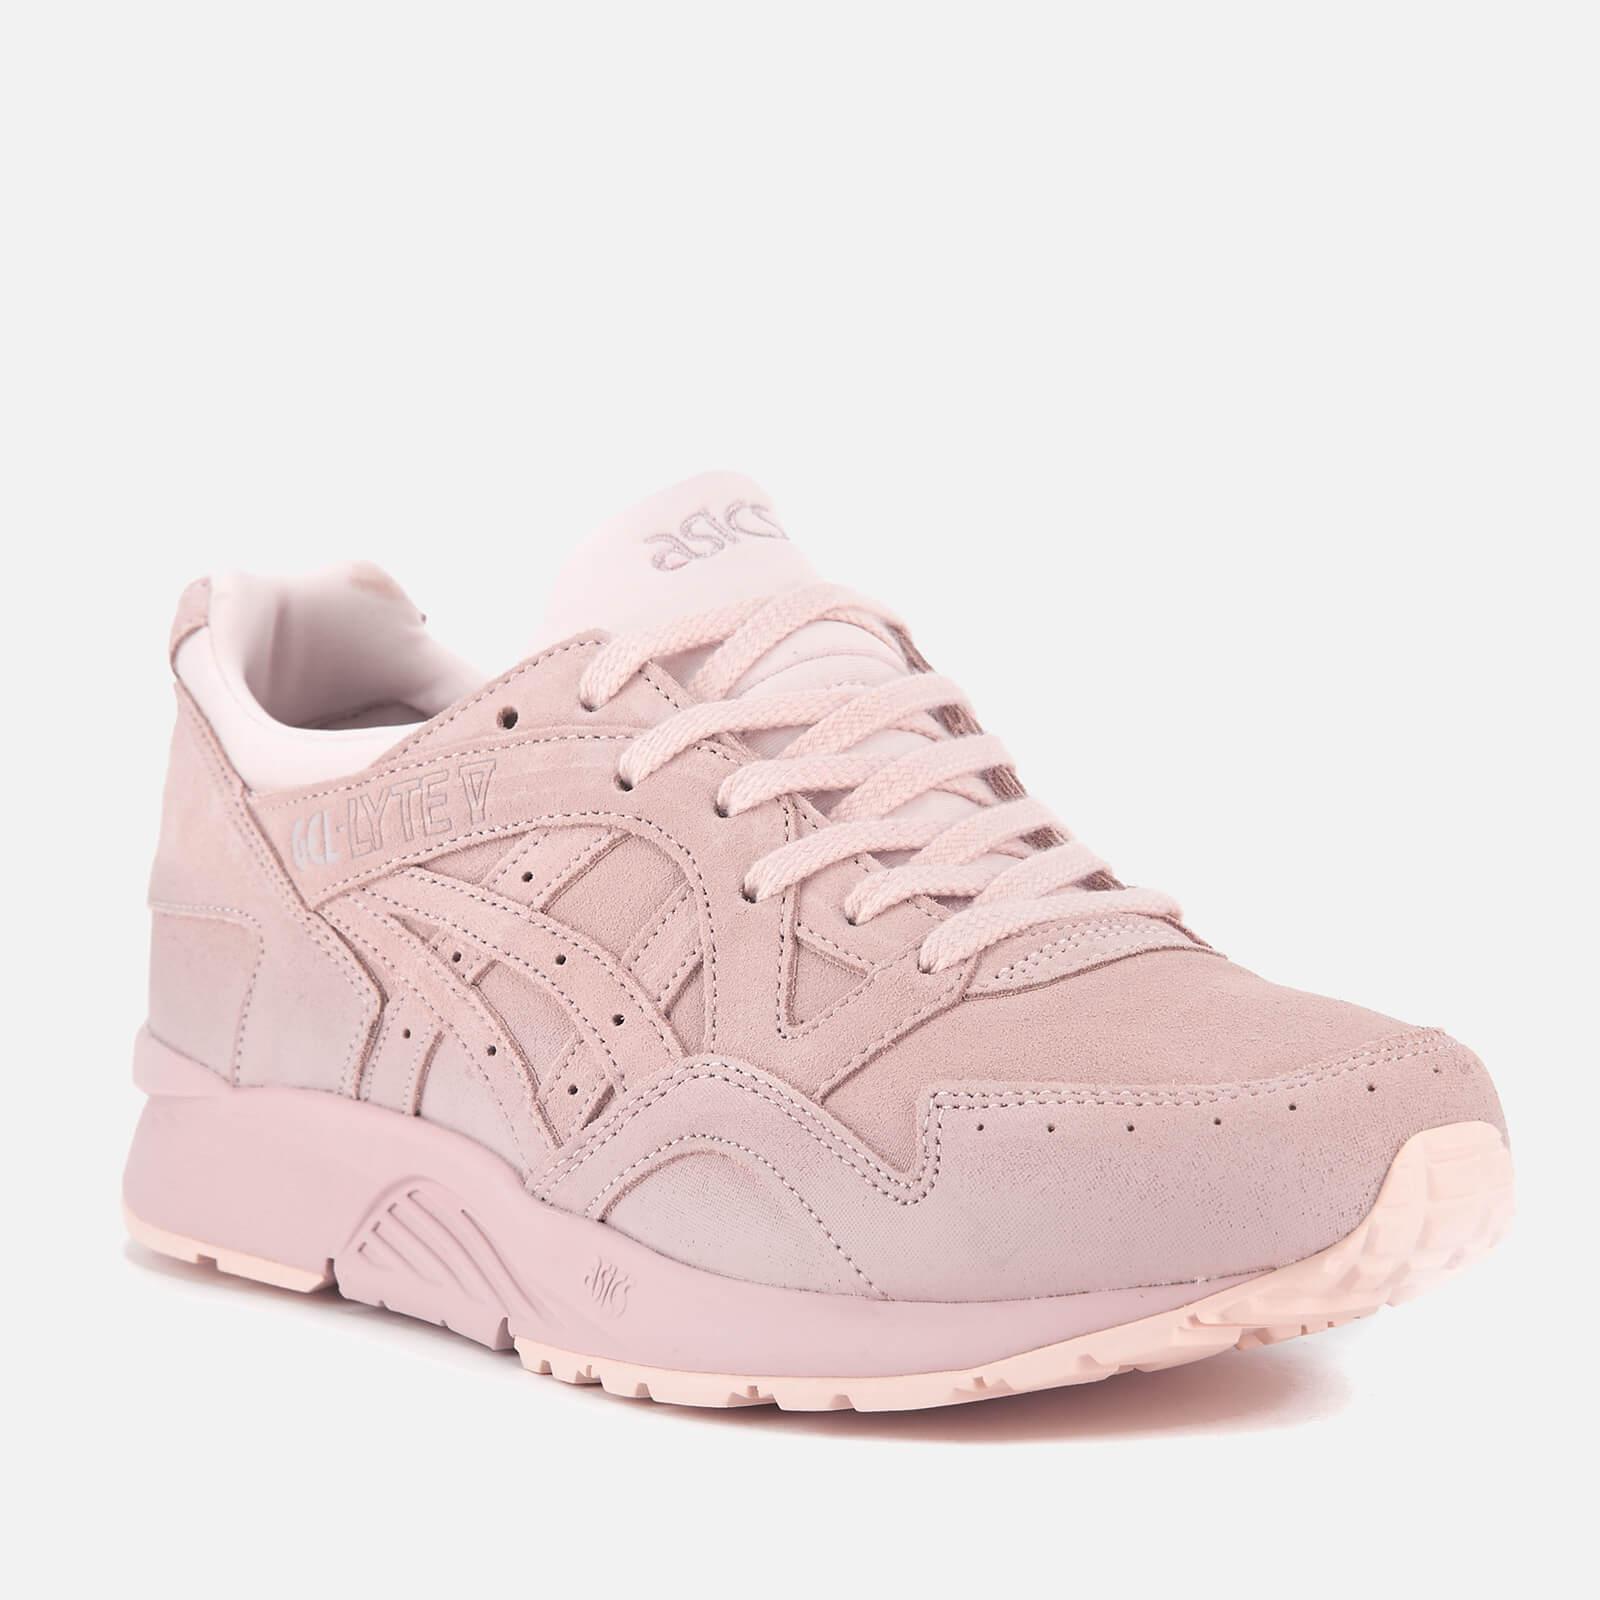 Asics Gel-lyte V Suede Trainers in Cream/Pink (Pink) - Lyst